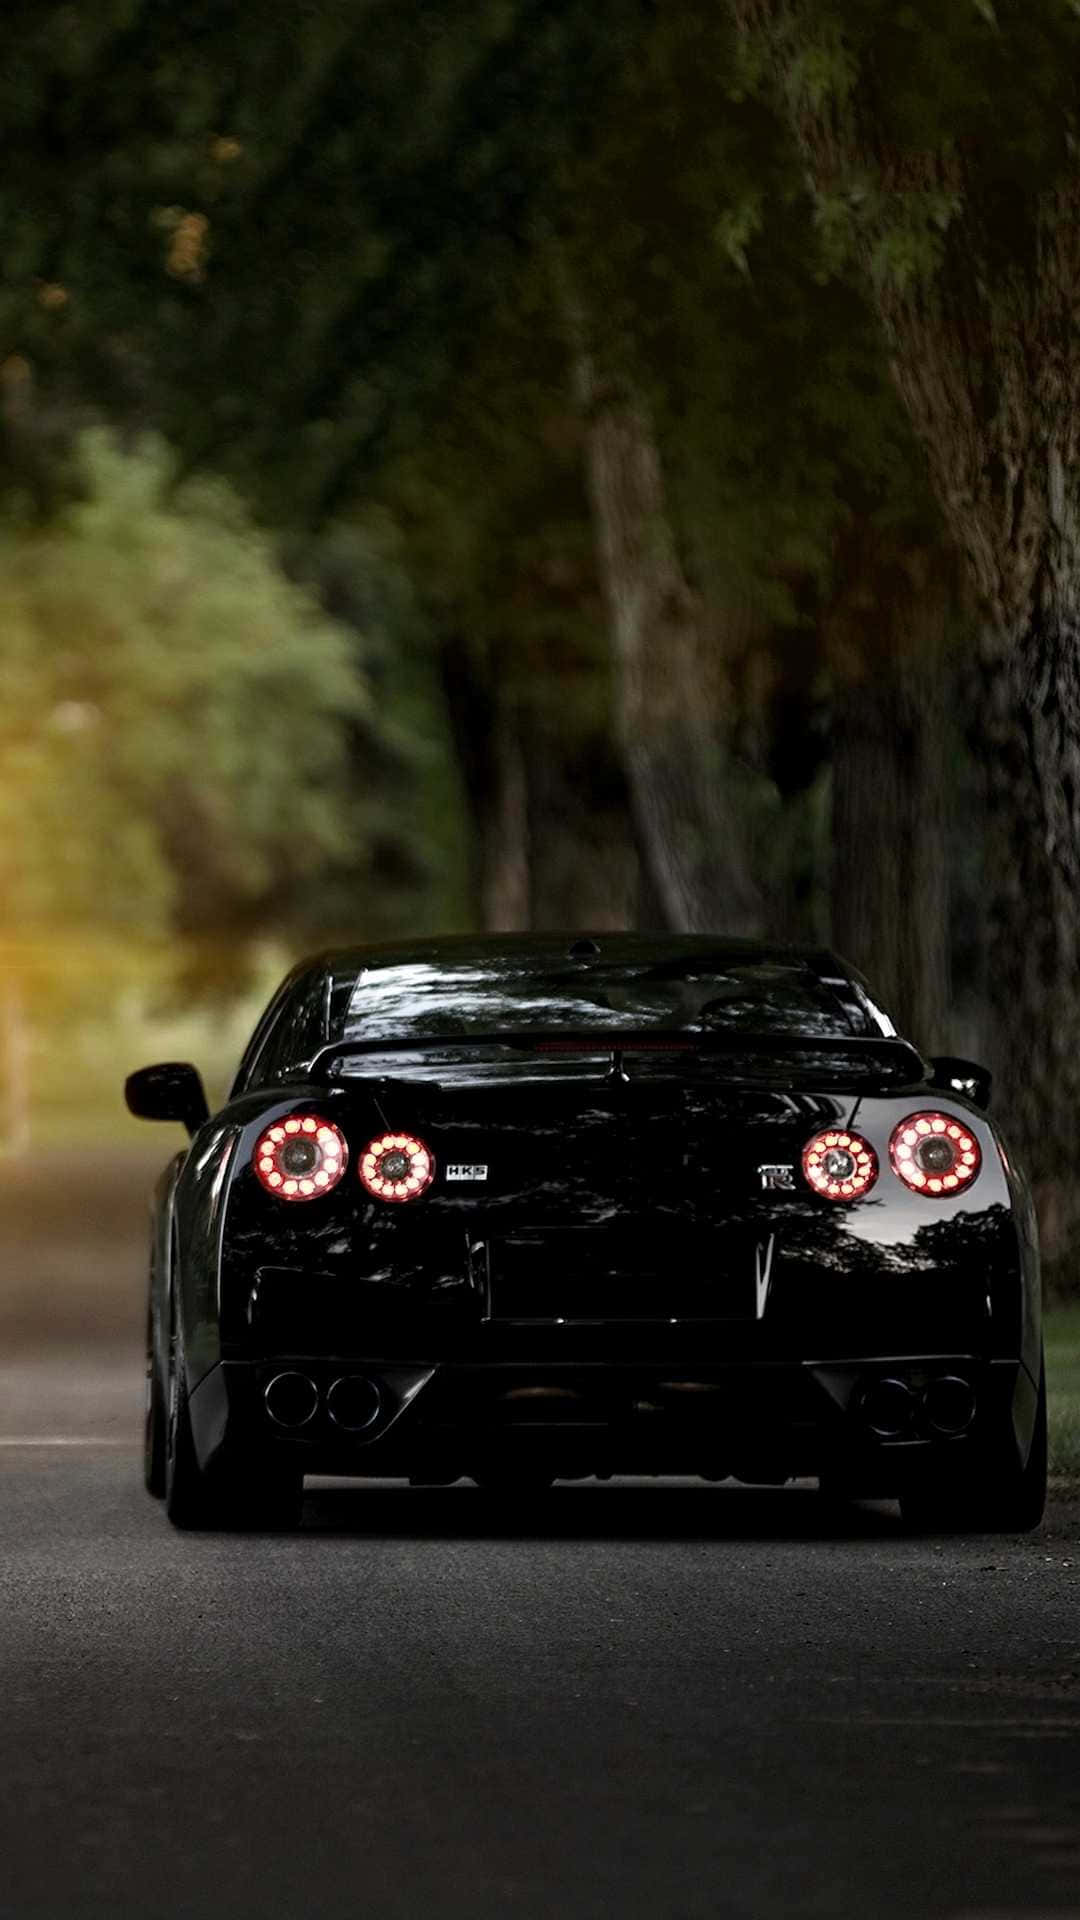 Unlock The Cool: Nissan Skyline For Your Iphone Wallpaper